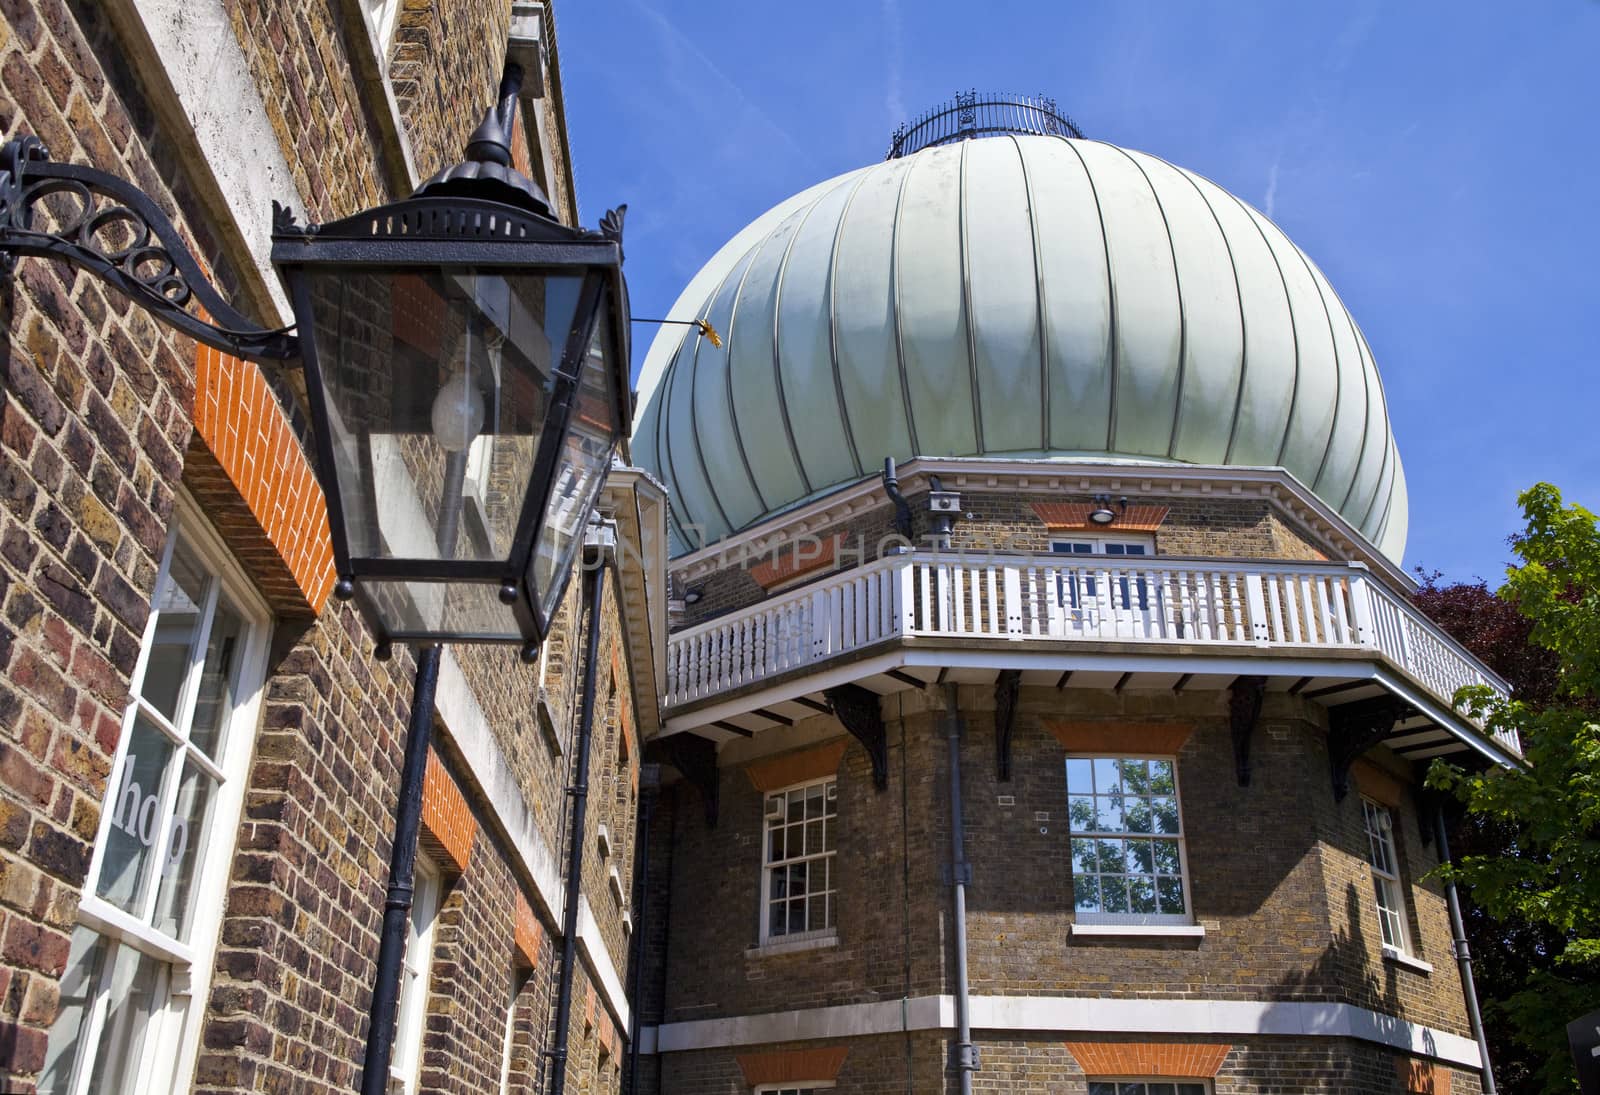 The Royal Observatory in Greenwich, London.